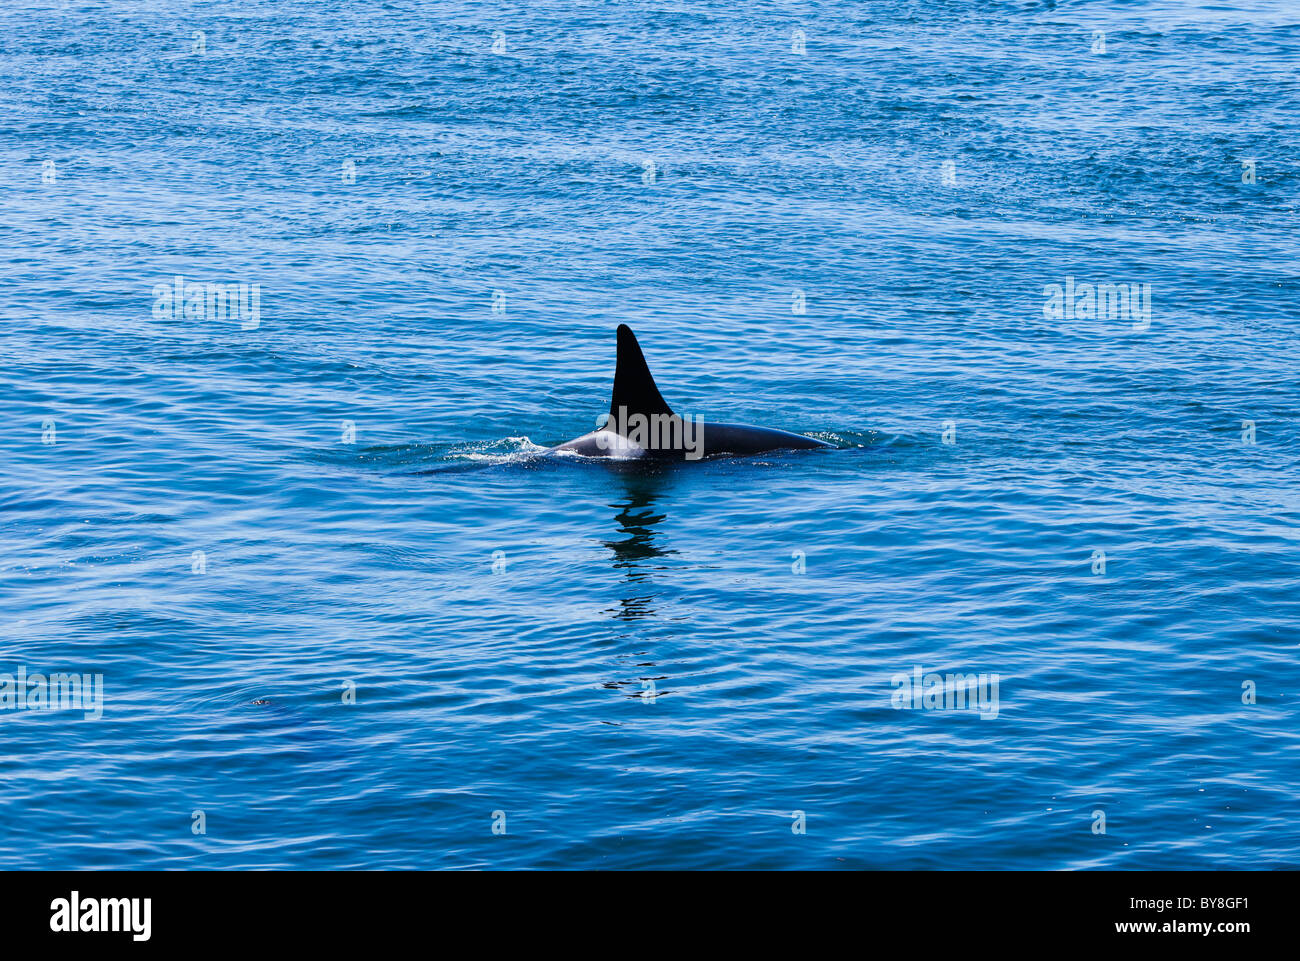 A single Orca whale surfaces for air in the waters just off Lime Kiln State Park on San Juan Island, Washington, USA. Stock Photo